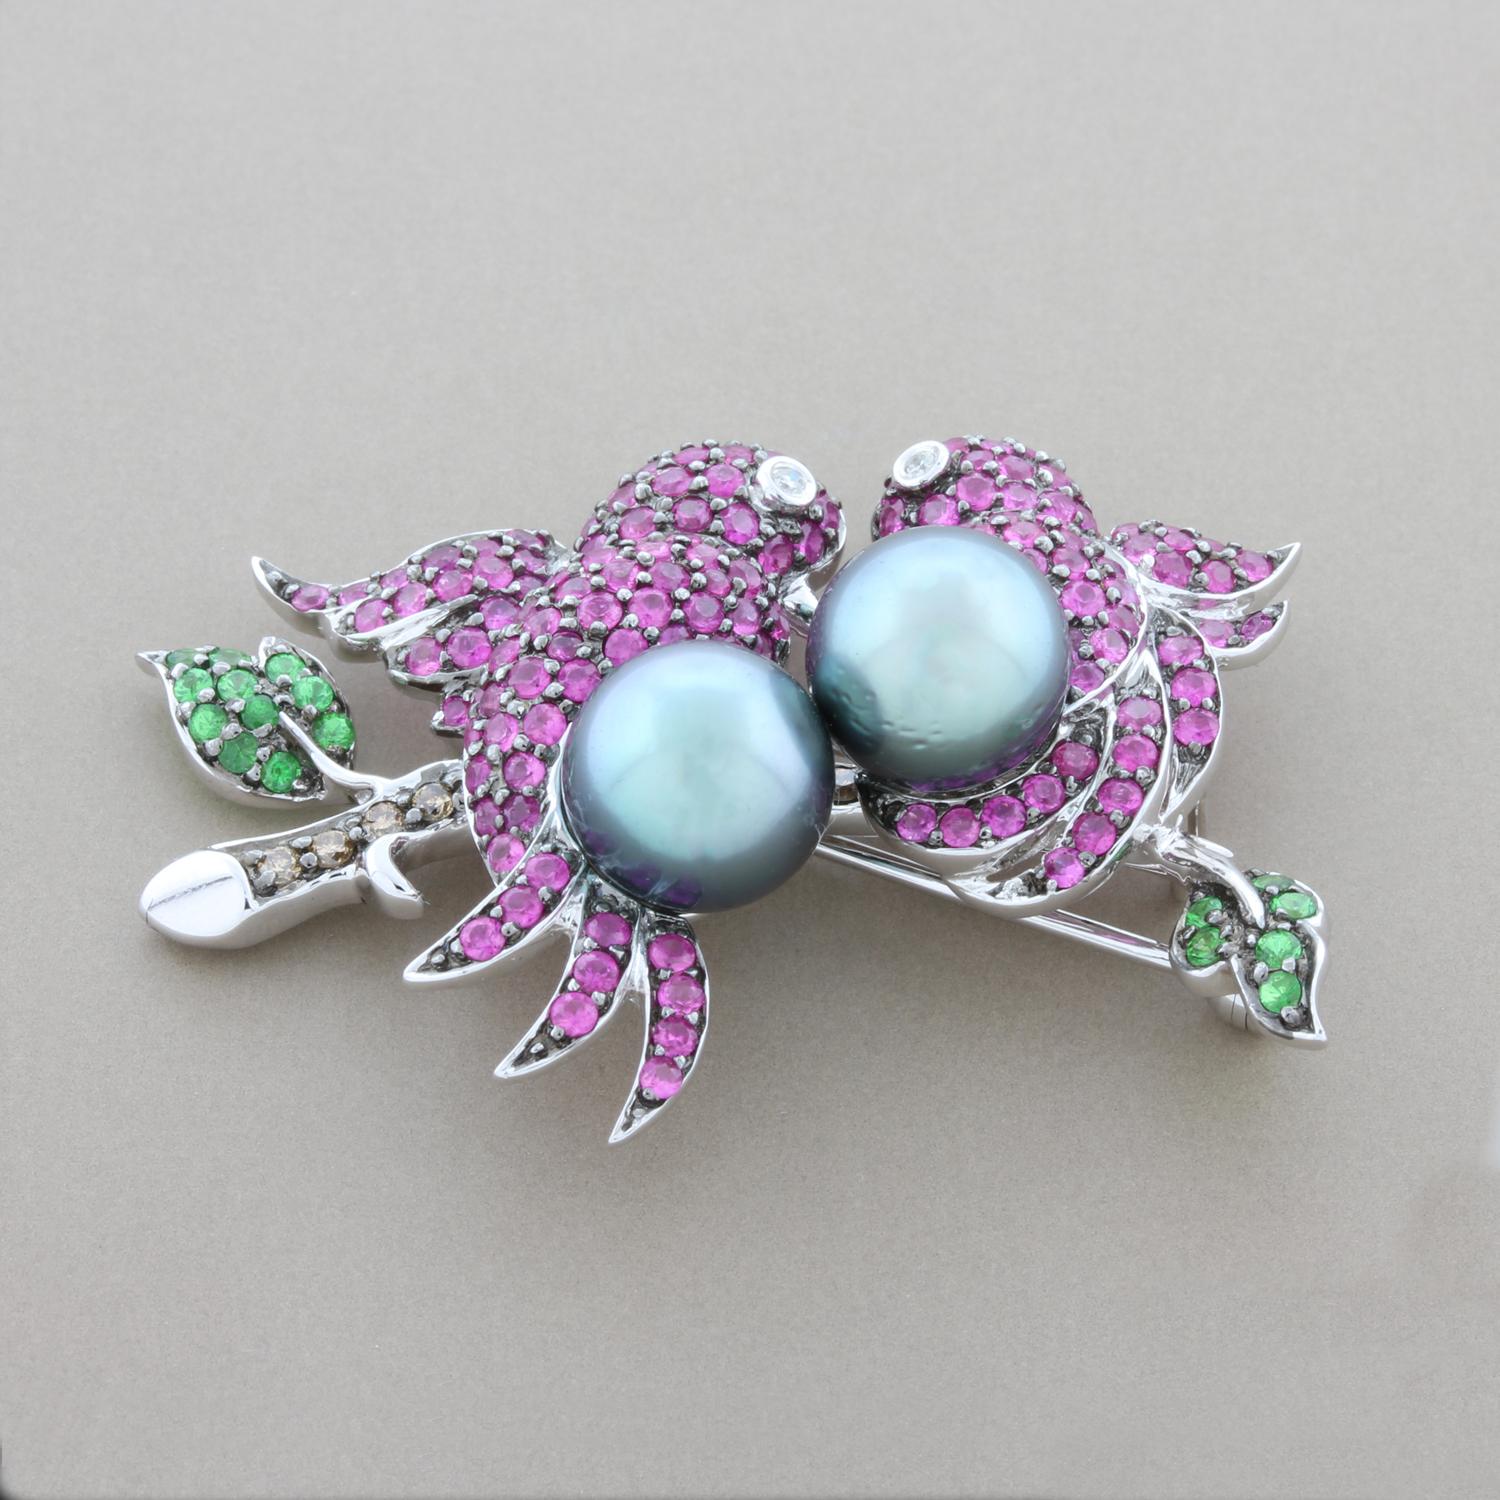 These two ruby studded love birds resting a branch of fancy color diamonds with emerald leaves and a pair of perfectly rounded lustrous Tahitian pearls will melt your heart. Set in 14K white gold and ready to be worn.

Brooch Length: 1.75